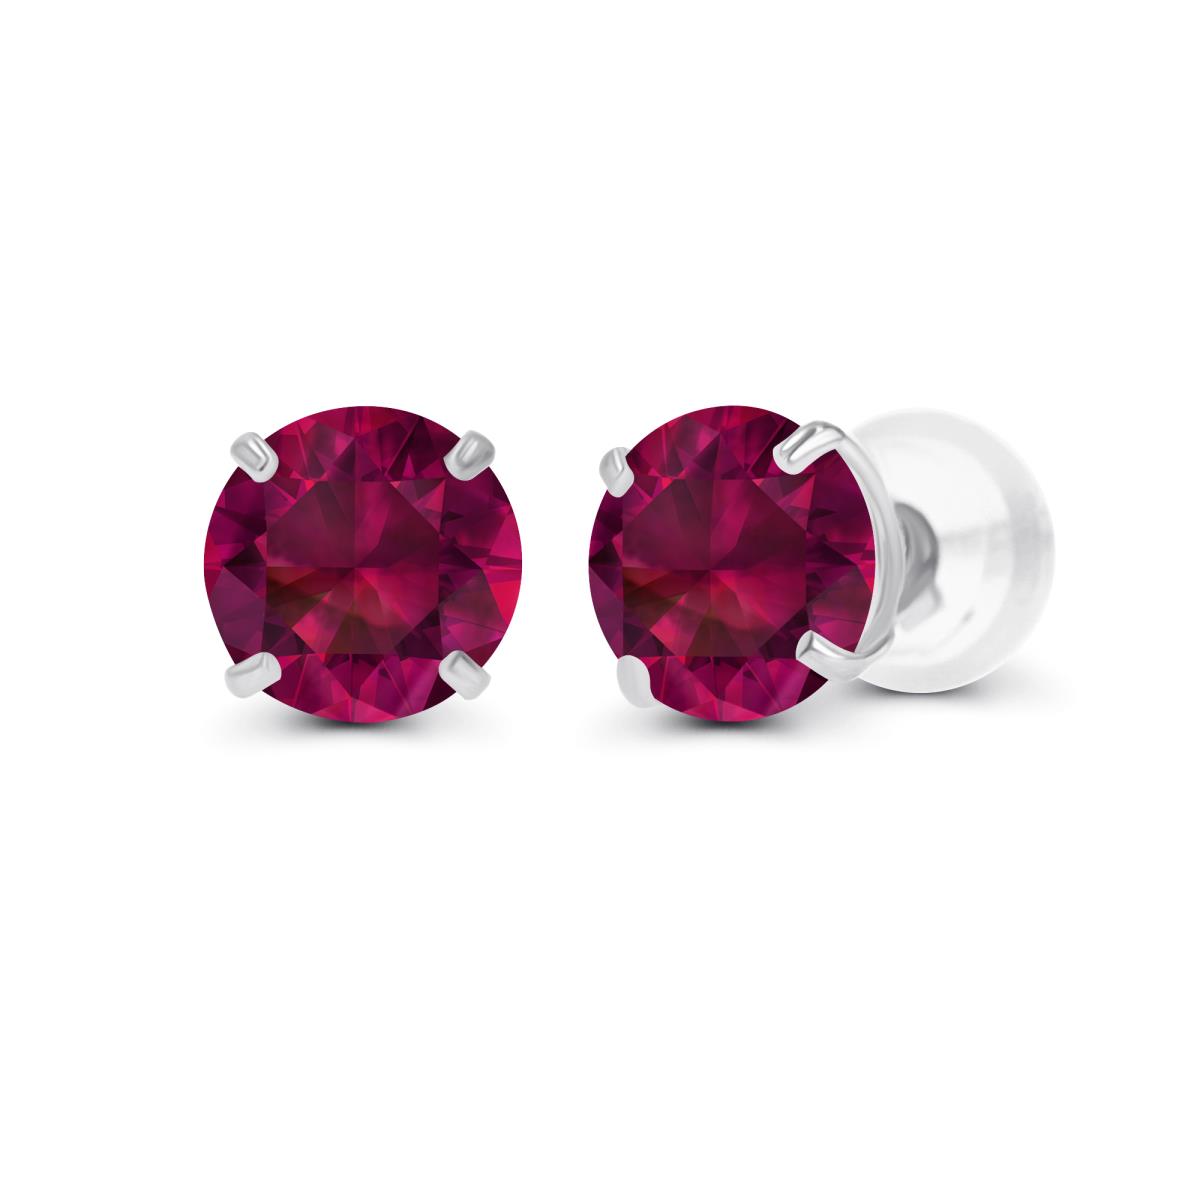 10K White Gold 4.00mm Round Created Ruby Stud Earring